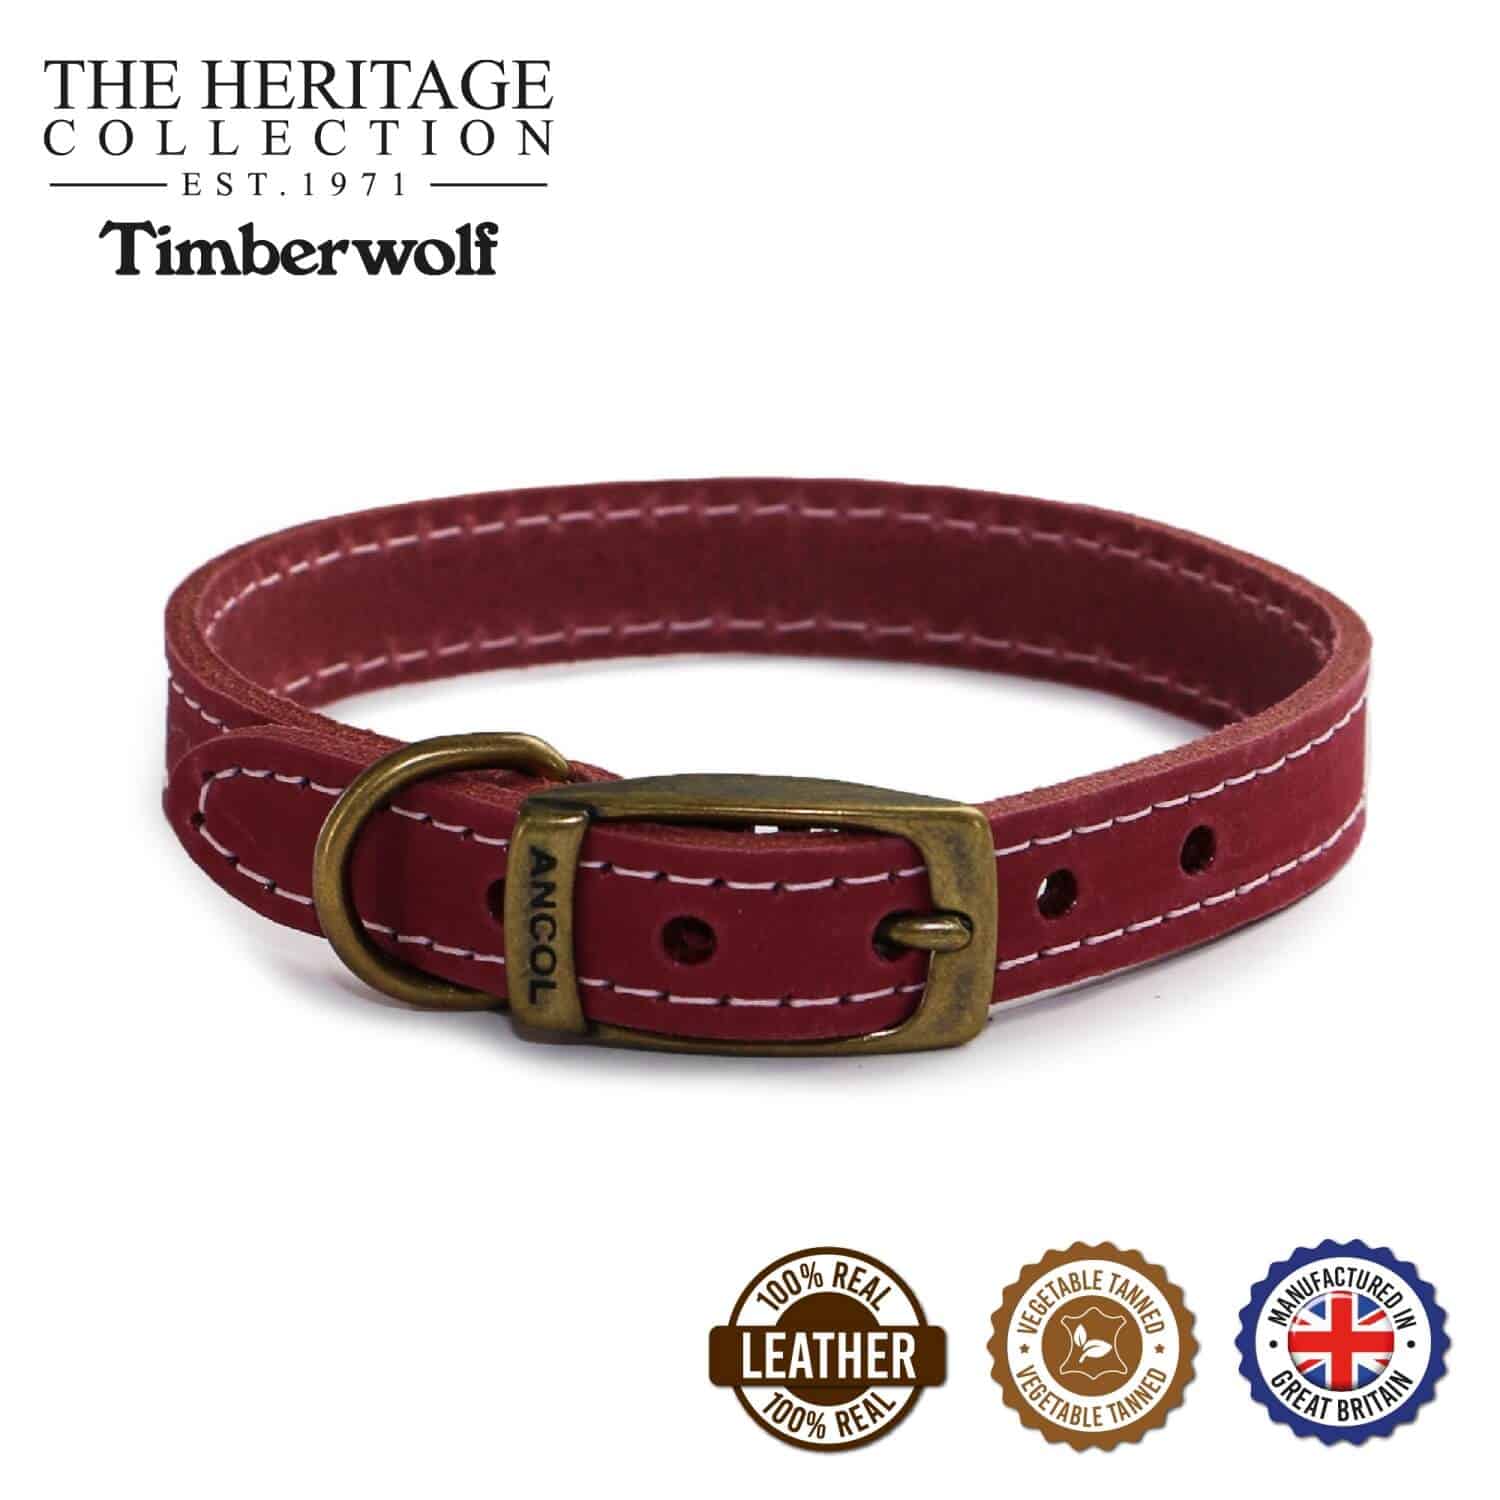 Timberwolf Top-Grain Bridle Leather Lead/Leash Optional Ancol Personalised Dog Collars